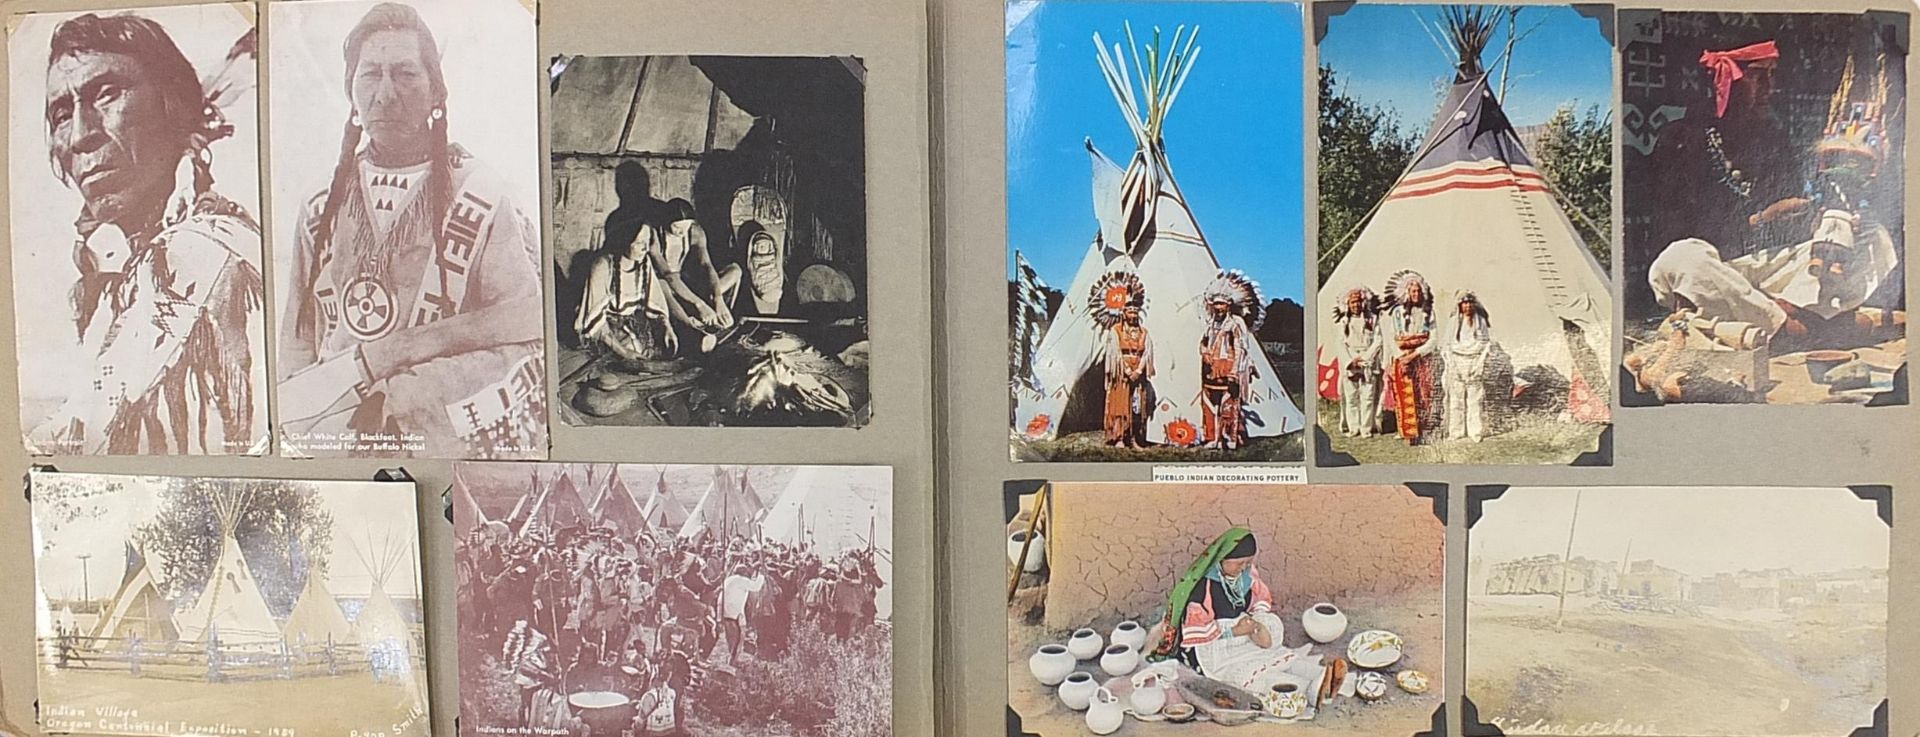 North American Indian photographs, some black and white, arranged in an album - Image 5 of 13